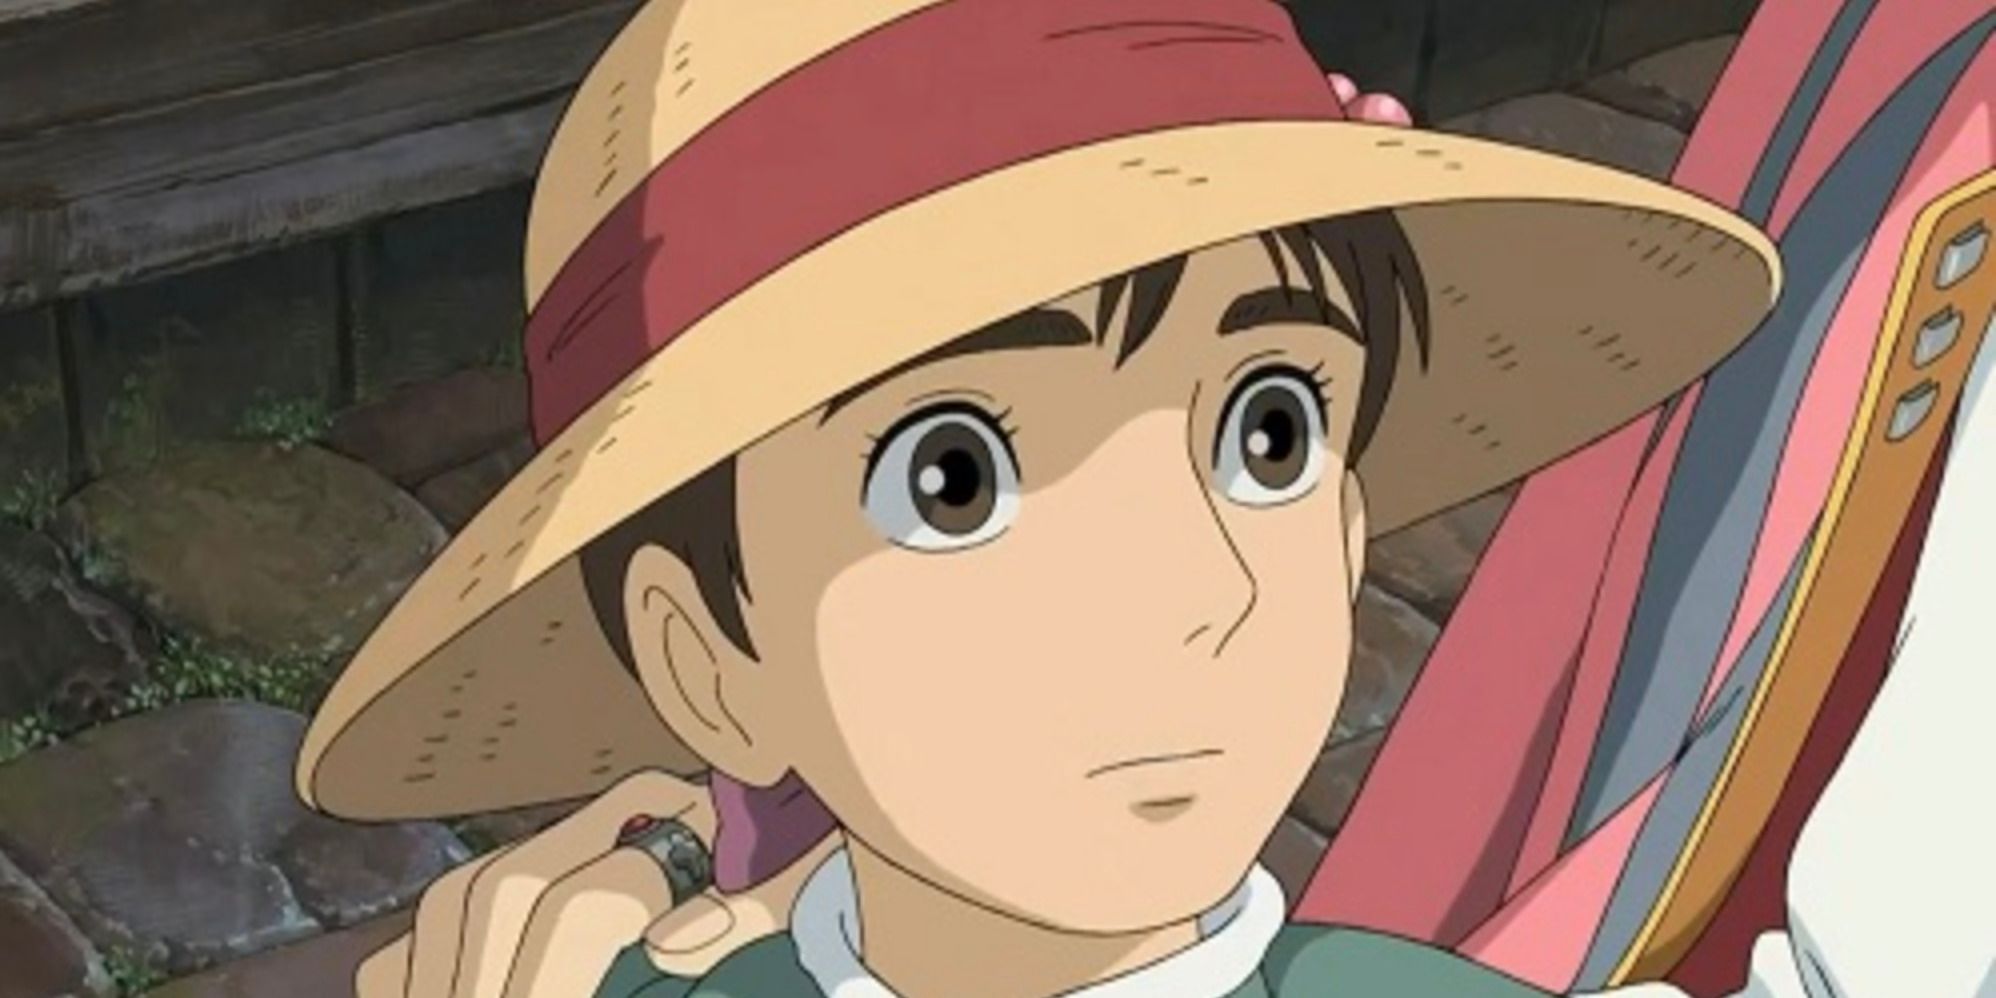 Young Sophie wearing hat and looking up nervously at Howl in Howl's Moving Castle